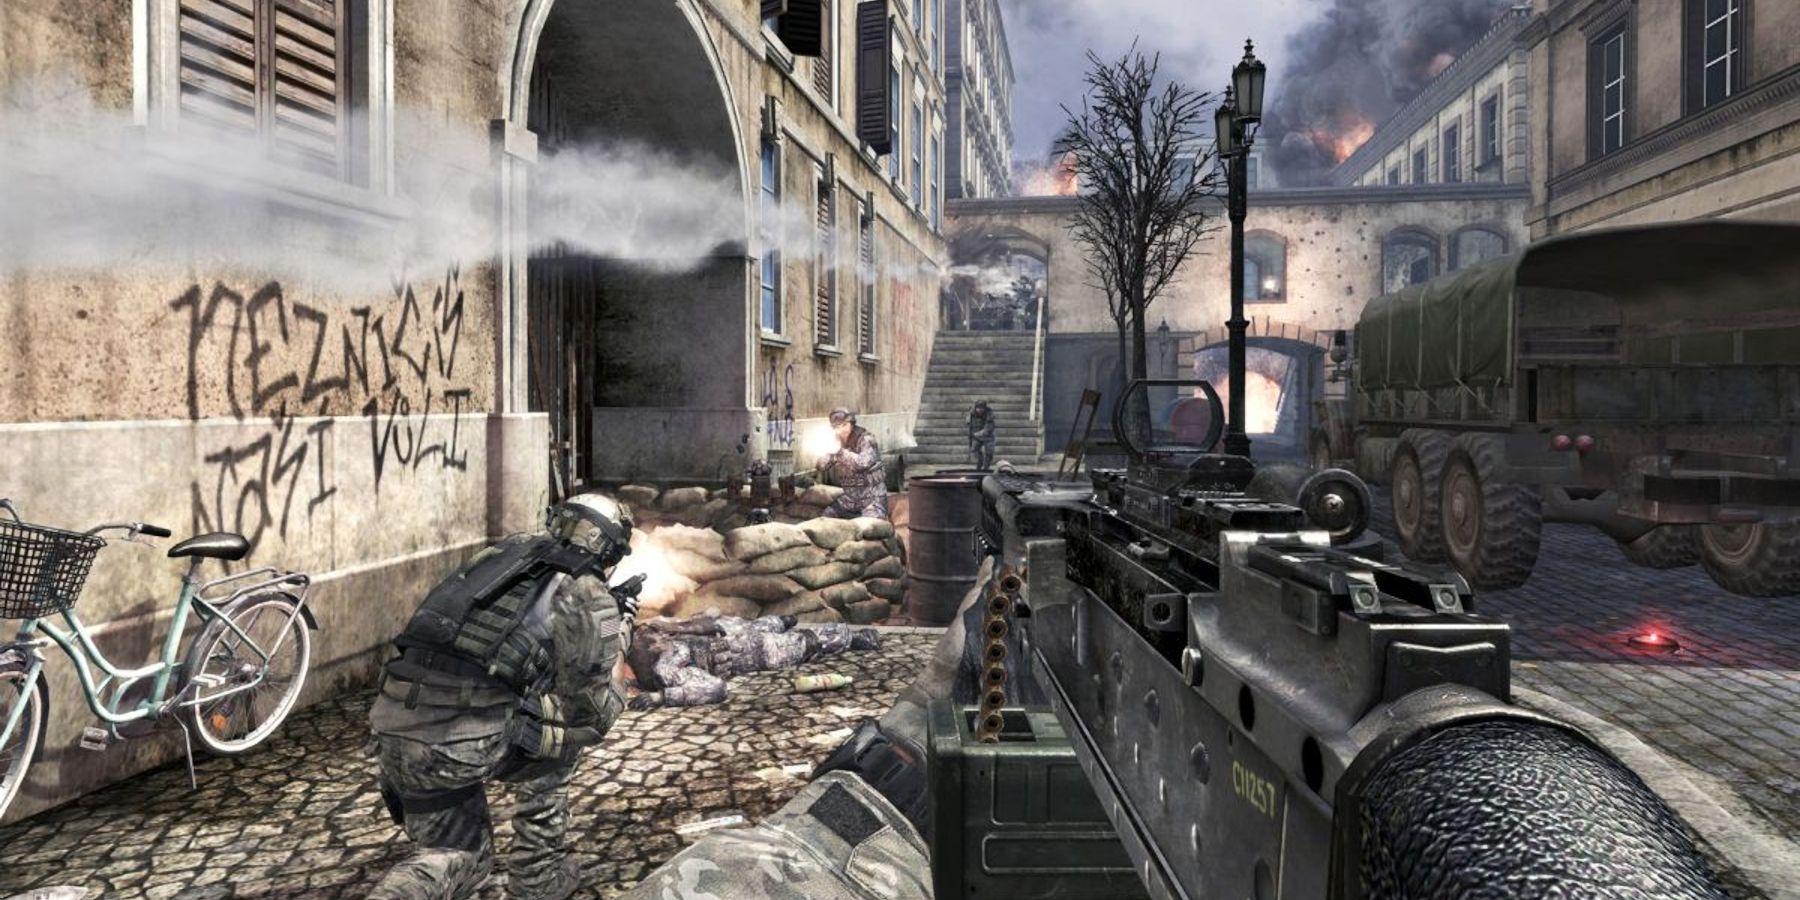 Players brand Modern Warfare 3 as one of the most polarizing Call of Duty  games yet - Dexerto